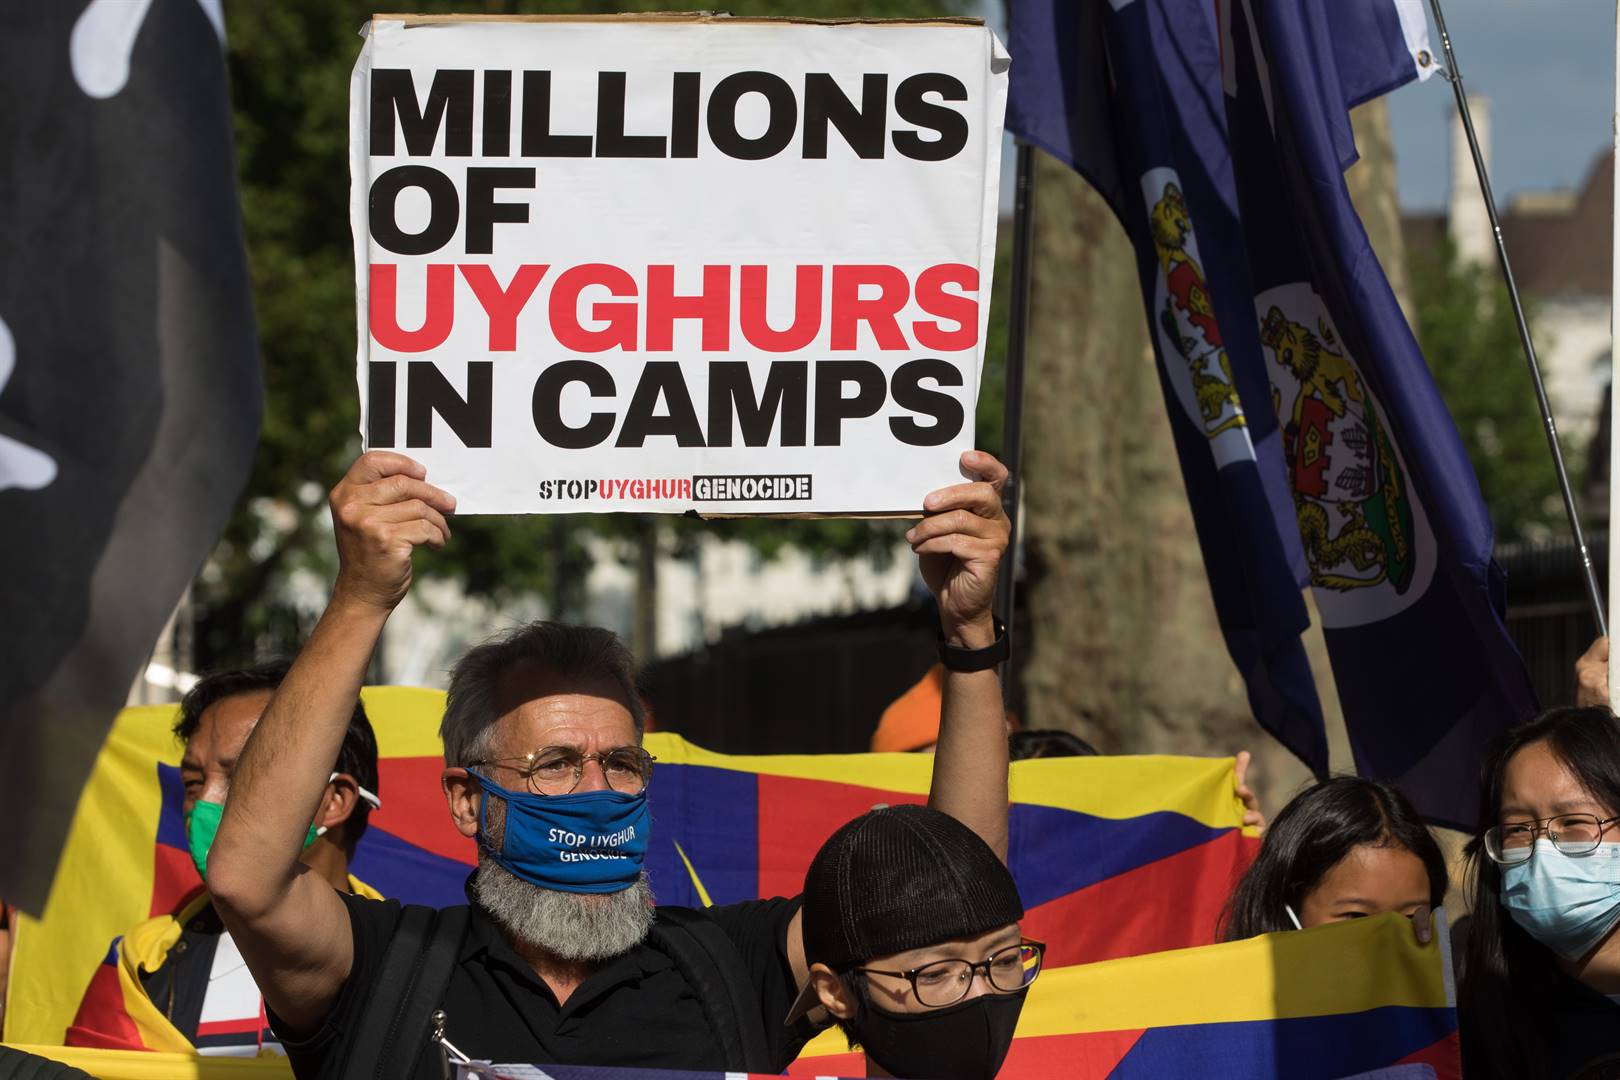 Critics say the human rights abuses against the Uighurs in Xinjiang province in China amount to a silent genocide, but the Chinese government says they are lies and fabrications. Photo: Getty Images